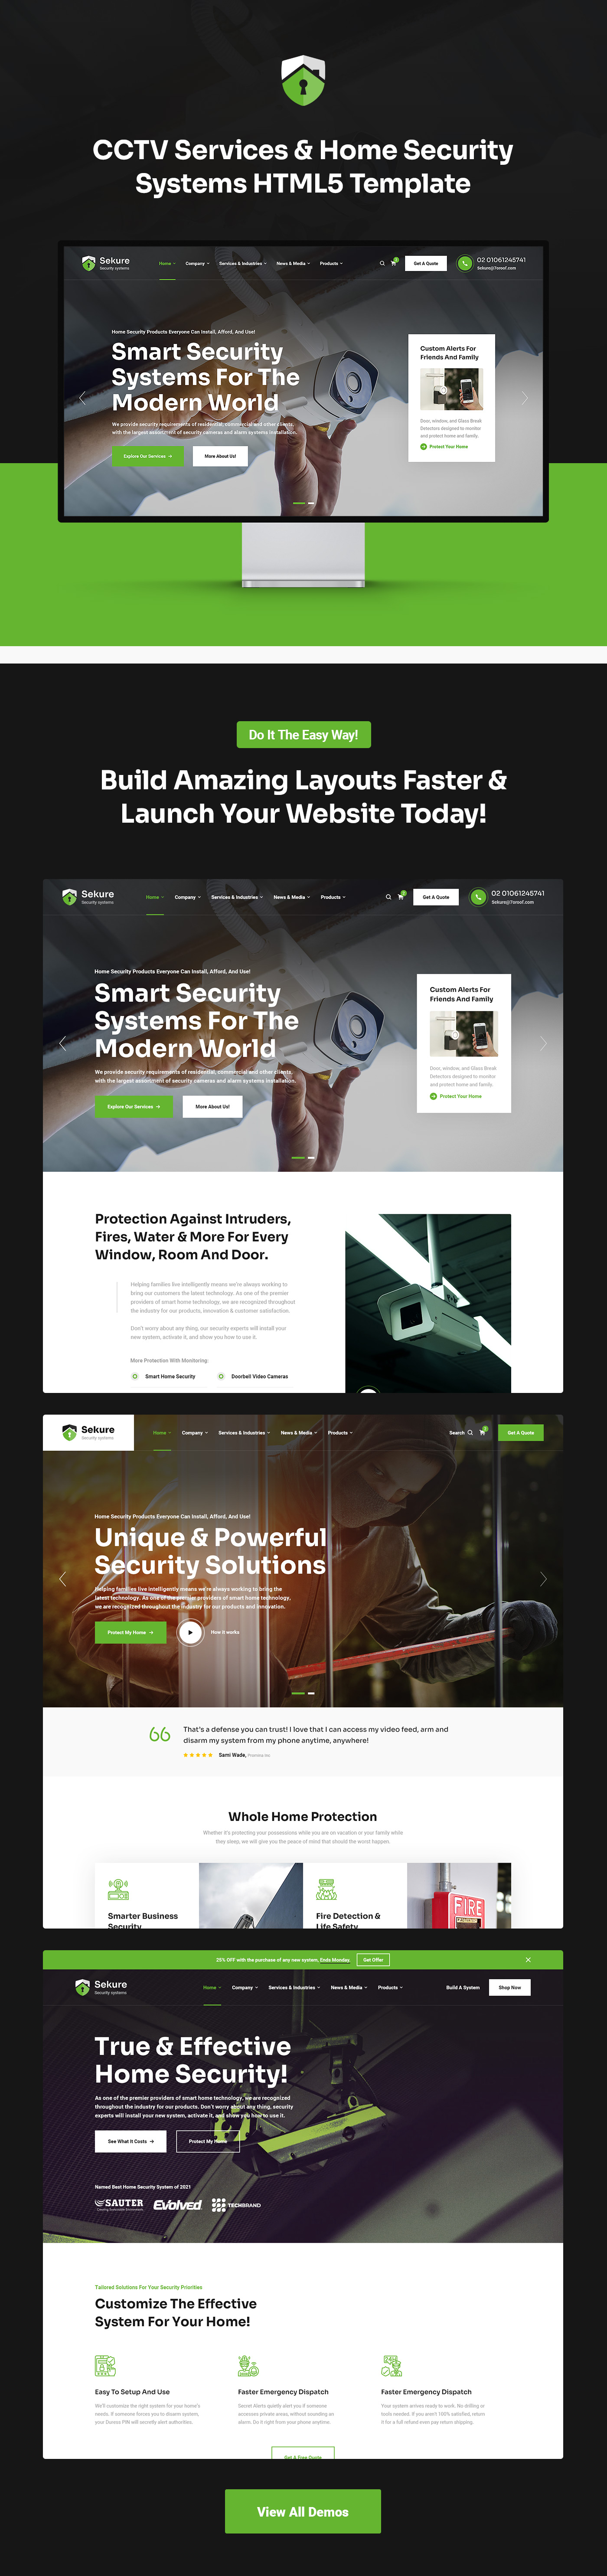 Sekure - CCTV and Security Systems HTML5 Template - 5